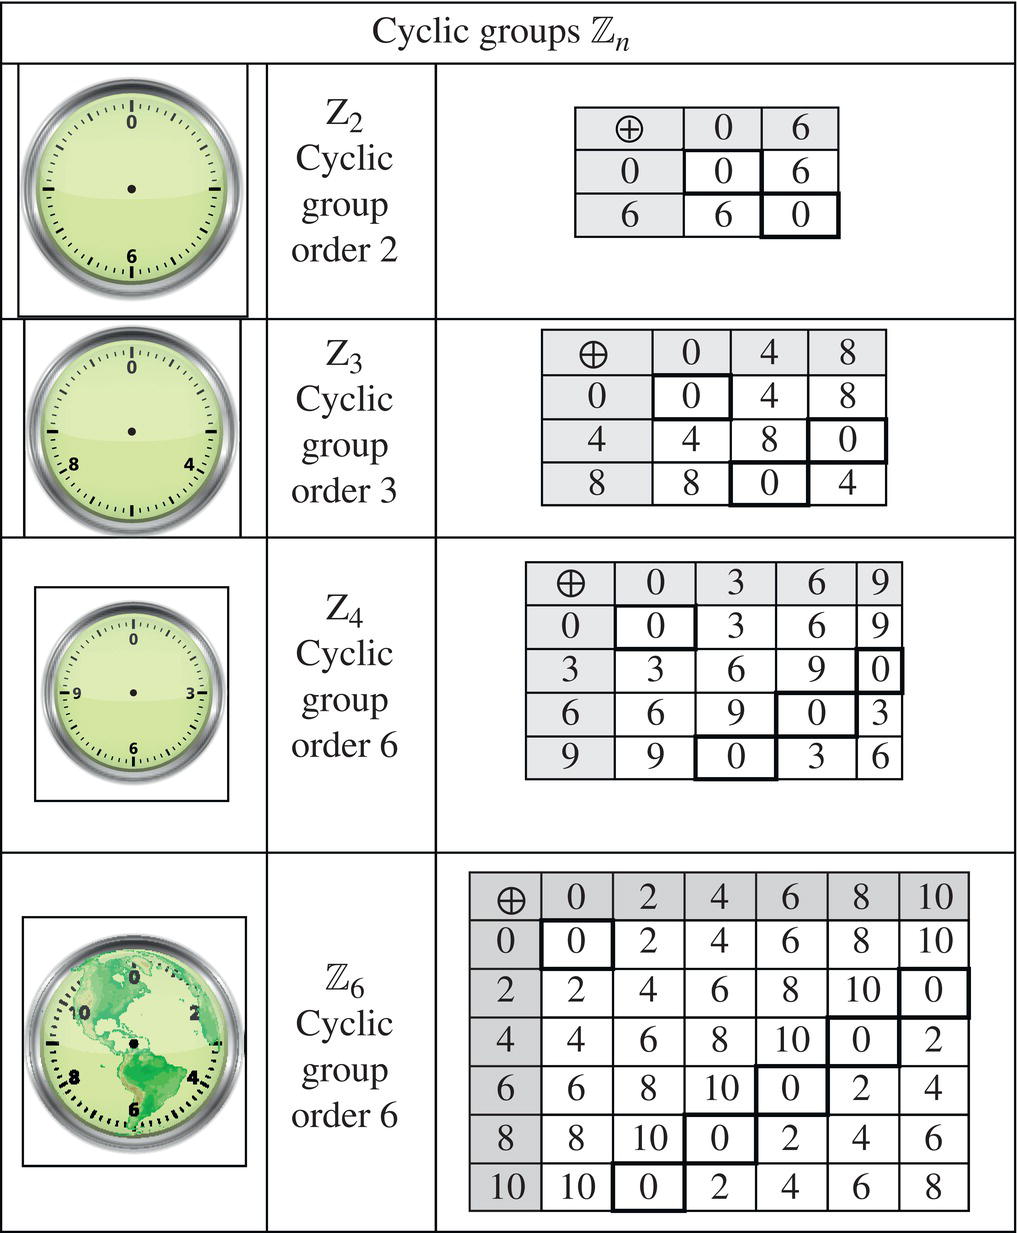 Diagram displaying various clocks that gives rise to different cyclic groups, namely, Z2 cyclic group order 2, Z3 cyclic group order 3, Z4 cyclic group order 6, and Z6 cyclic group order 6.